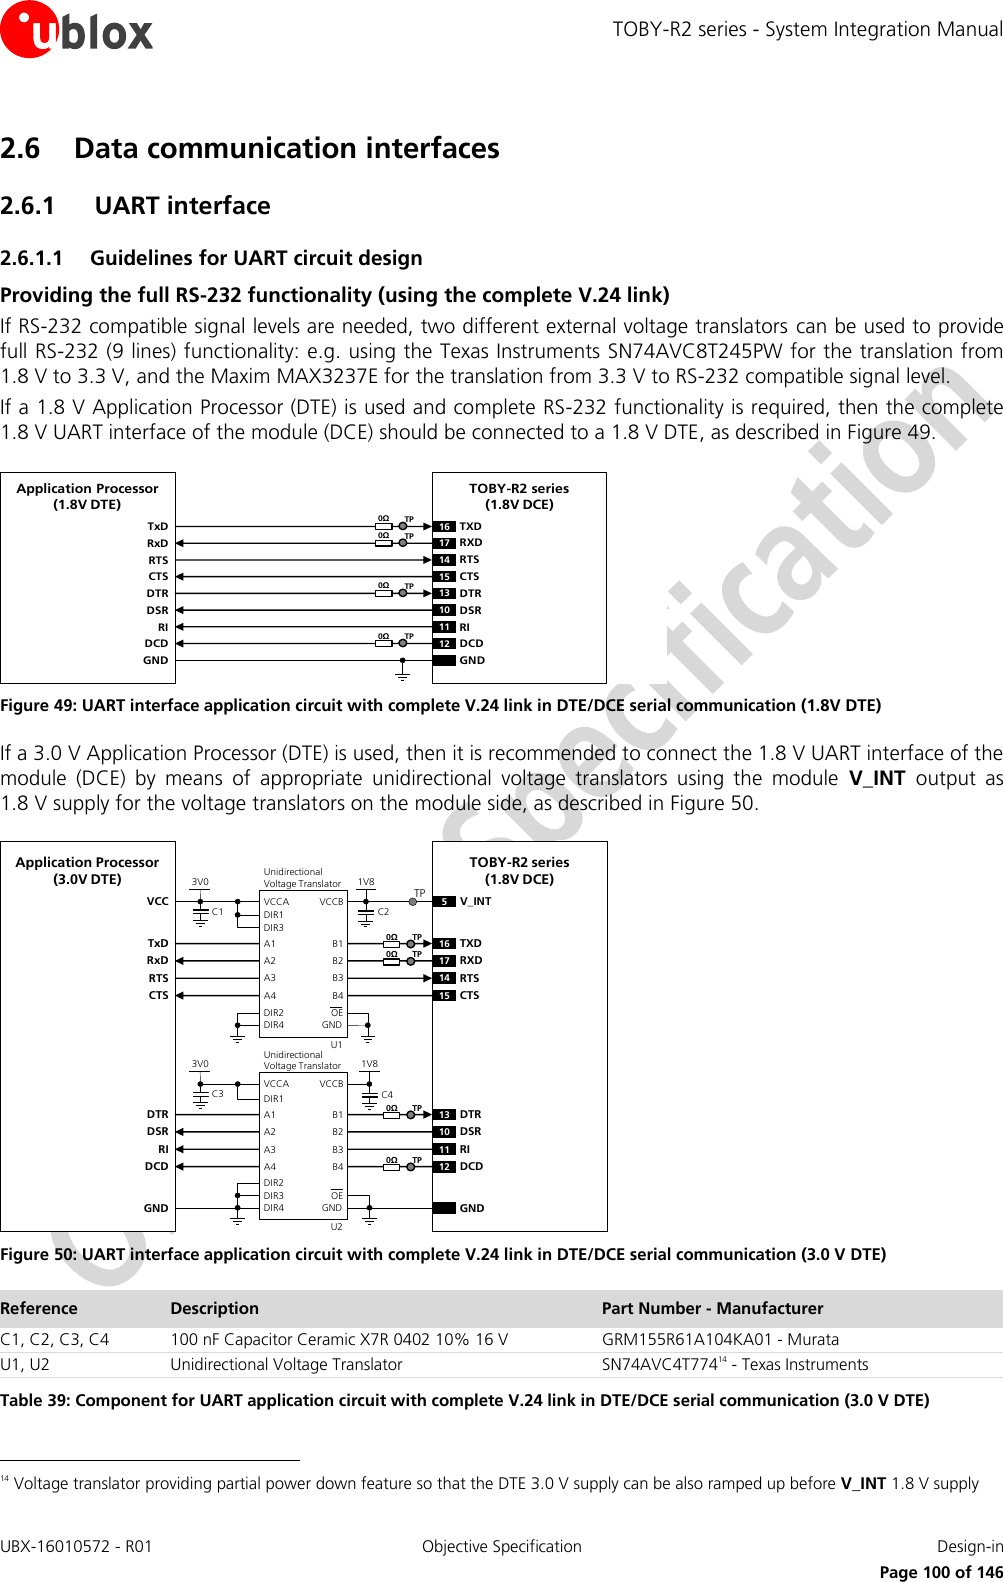 TOBY-R2 series - System Integration Manual UBX-16010572 - R01  Objective Specification  Design-in     Page 100 of 146 2.6 Data communication interfaces 2.6.1 UART interface 2.6.1.1 Guidelines for UART circuit design Providing the full RS-232 functionality (using the complete V.24 link) If RS-232 compatible signal levels are needed, two different external voltage translators  can be used to provide full RS-232 (9 lines) functionality: e.g. using the Texas Instruments SN74AVC8T245PW for the translation from 1.8 V to 3.3 V, and the Maxim MAX3237E for the translation from 3.3 V to RS-232 compatible signal level. If a 1.8 V Application Processor (DTE) is used and complete RS-232 functionality is required, then the complete 1.8 V UART interface of the module (DCE) should be connected to a 1.8 V DTE, as described in Figure 49. TxDApplication Processor(1.8V DTE)RxDRTSCTSDTRDSRRIDCDGNDTOBY-R2 series (1.8V DCE)16 TXD13 DTR17 RXD14 RTS15 CTS10 DSR11 RI12 DCDGND0ΩTP0ΩTP0ΩTP0ΩTP Figure 49: UART interface application circuit with complete V.24 link in DTE/DCE serial communication (1.8V DTE) If a 3.0 V Application Processor (DTE) is used, then it is recommended to connect the 1.8 V UART interface of the module  (DCE)  by  means  of  appropriate  unidirectional  voltage  translators  using  the  module  V_INT  output  as 1.8 V supply for the voltage translators on the module side, as described in Figure 50. 5V_INTTxDApplication Processor(3.0V DTE)RxDRTSCTSDTRDSRRIDCDGNDTOBY-R2 series (1.8V DCE)16 TXD13 DTR17 RXD14 RTS15 CTS10 DSR11 RI12 DCDGND1V8B1 A1GNDU1B3A3VCCBVCCAUnidirectionalVoltage TranslatorC1 C23V0DIR3DIR2 OEDIR1VCCB2 A2B4A4DIR41V8B1 A1GNDU2B3A3VCCBVCCAUnidirectionalVoltage TranslatorC3 C43V0DIR1DIR3 OEB2 A2B4A4DIR4DIR2TP0ΩTP0ΩTP0ΩTP0ΩTP Figure 50: UART interface application circuit with complete V.24 link in DTE/DCE serial communication (3.0 V DTE) Reference Description Part Number - Manufacturer C1, C2, C3, C4 100 nF Capacitor Ceramic X7R 0402 10% 16 V GRM155R61A104KA01 - Murata U1, U2 Unidirectional Voltage Translator SN74AVC4T77414 - Texas Instruments Table 39: Component for UART application circuit with complete V.24 link in DTE/DCE serial communication (3.0 V DTE)                                                       14 Voltage translator providing partial power down feature so that the DTE 3.0 V supply can be also ramped up before V_INT 1.8 V supply 